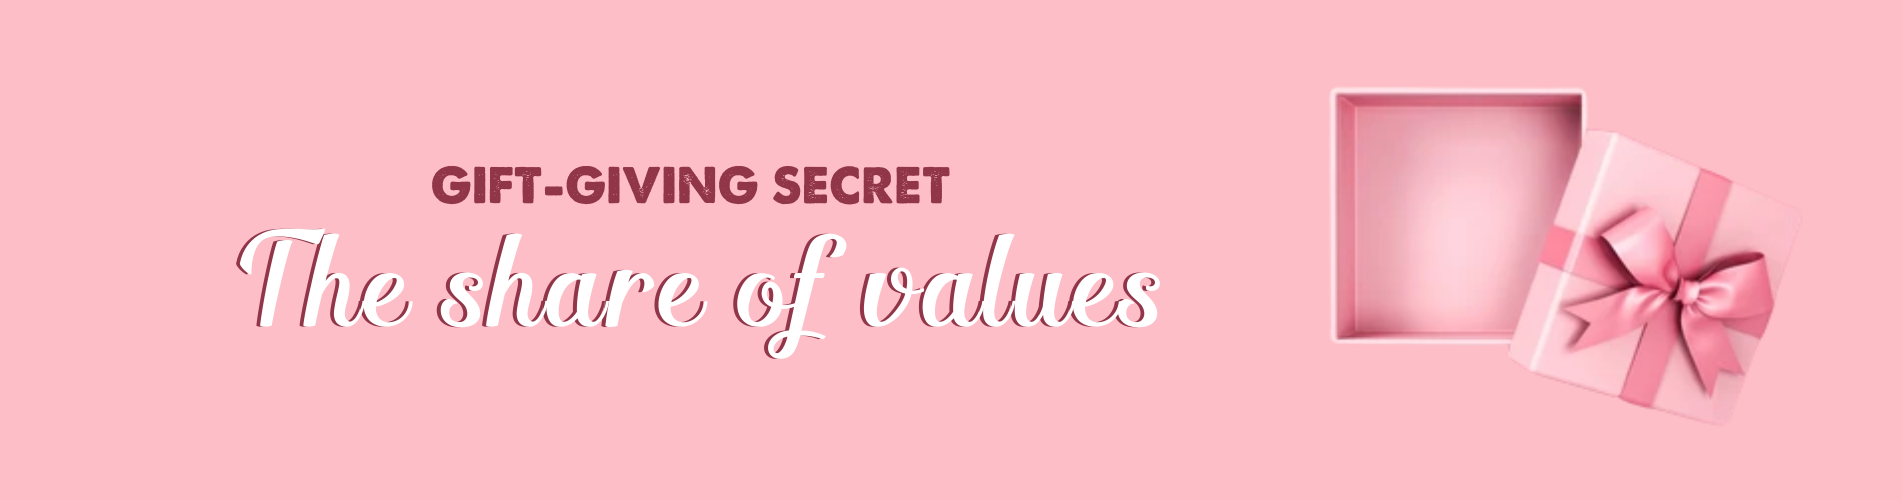 GIFT-GIVING SECRET: THE SHARE OF VALUES